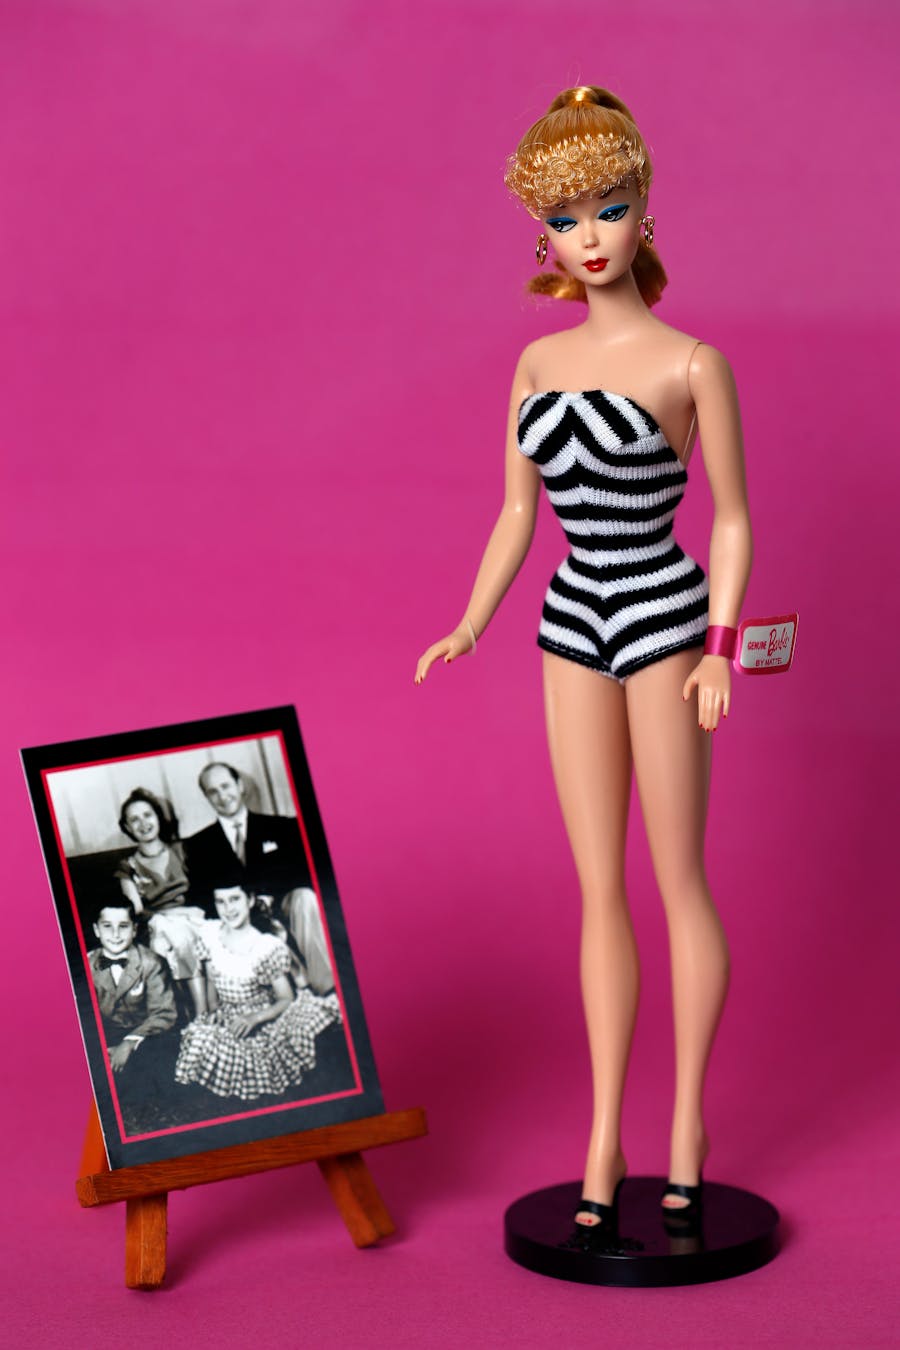 What's your Barbie doll collection worth? Here's how to check